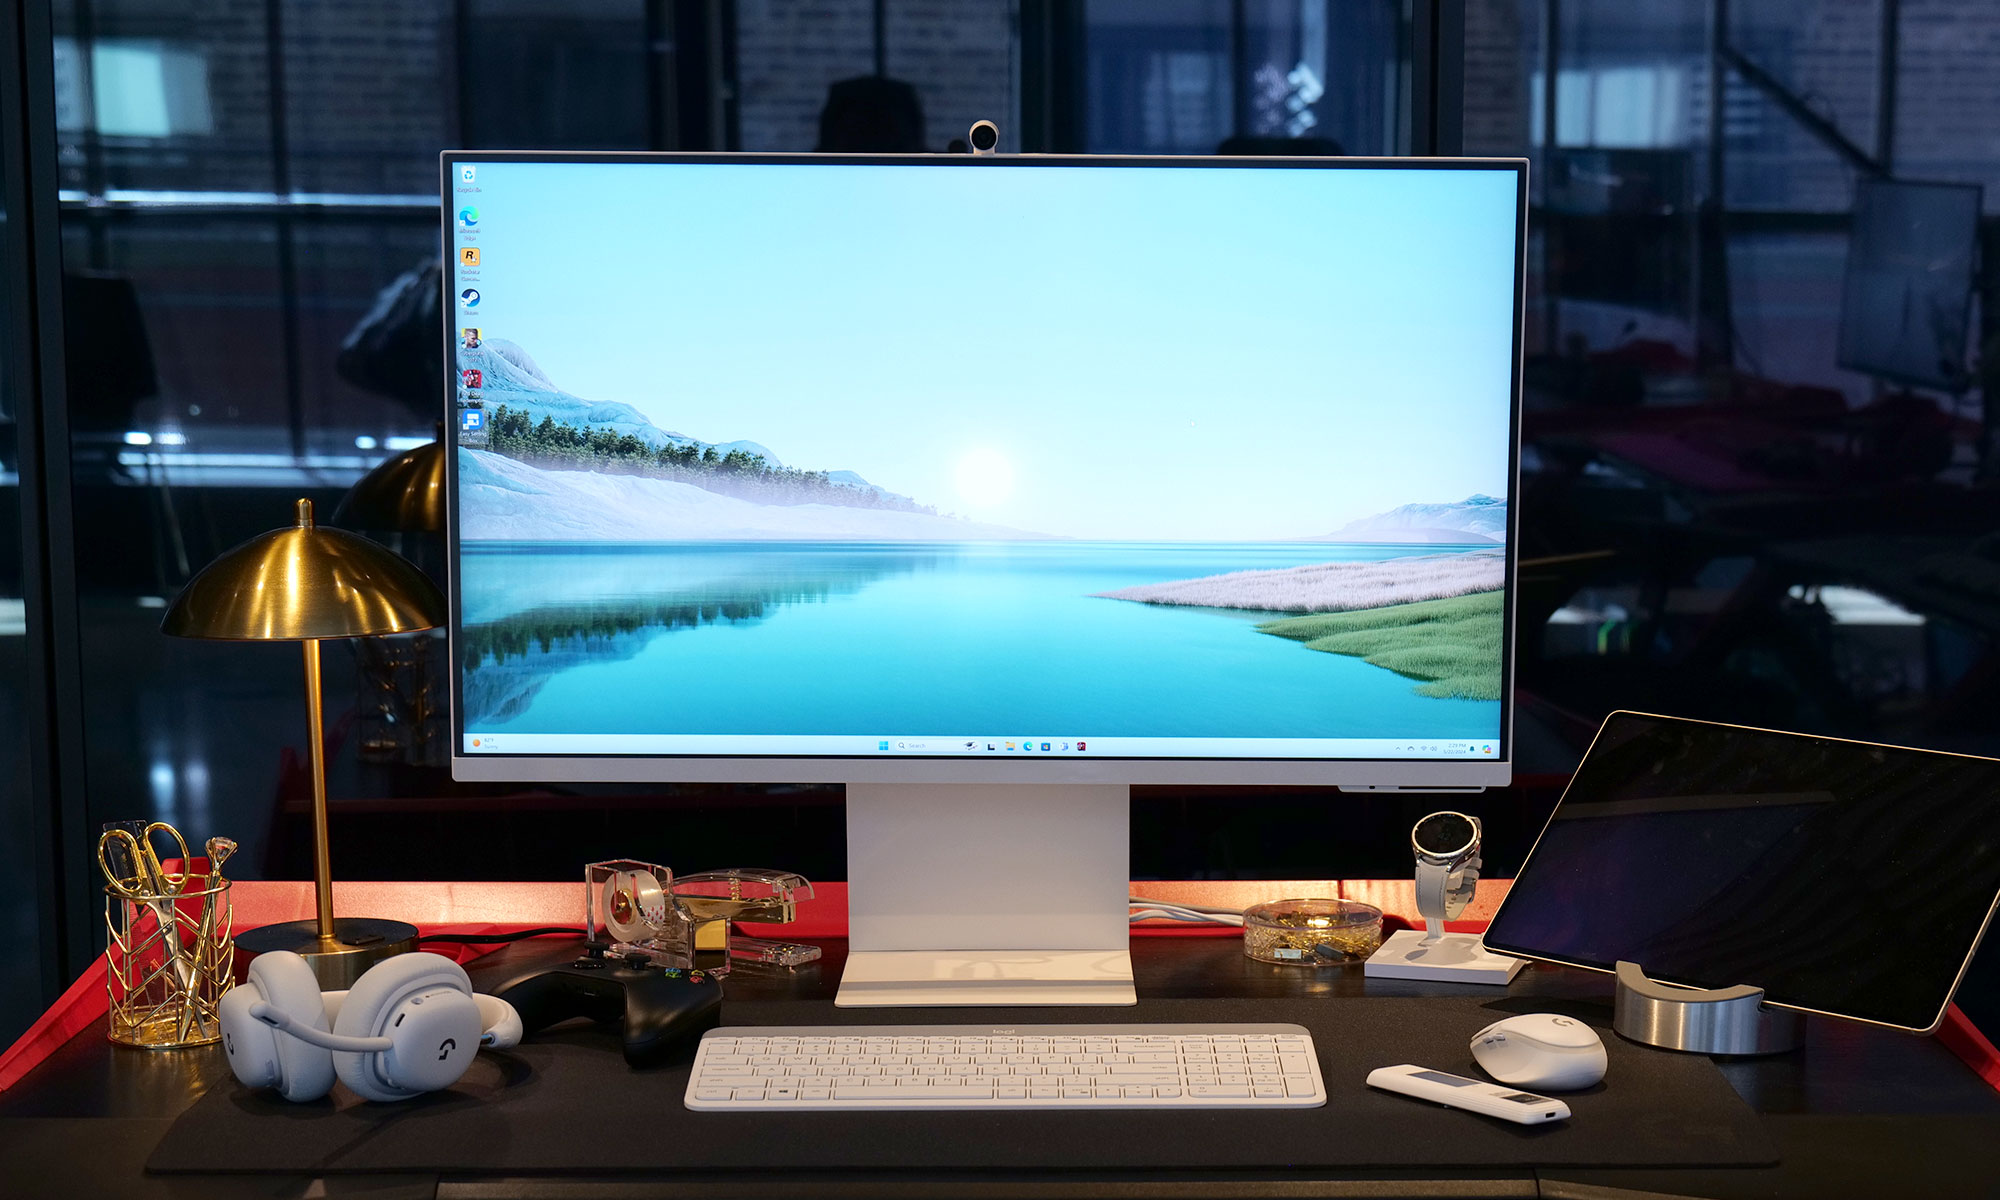 Samsung's M80D Smart Monitor is an interesting taking on a productivity display with a 4K resolution, PIP support, an included remote and more. 